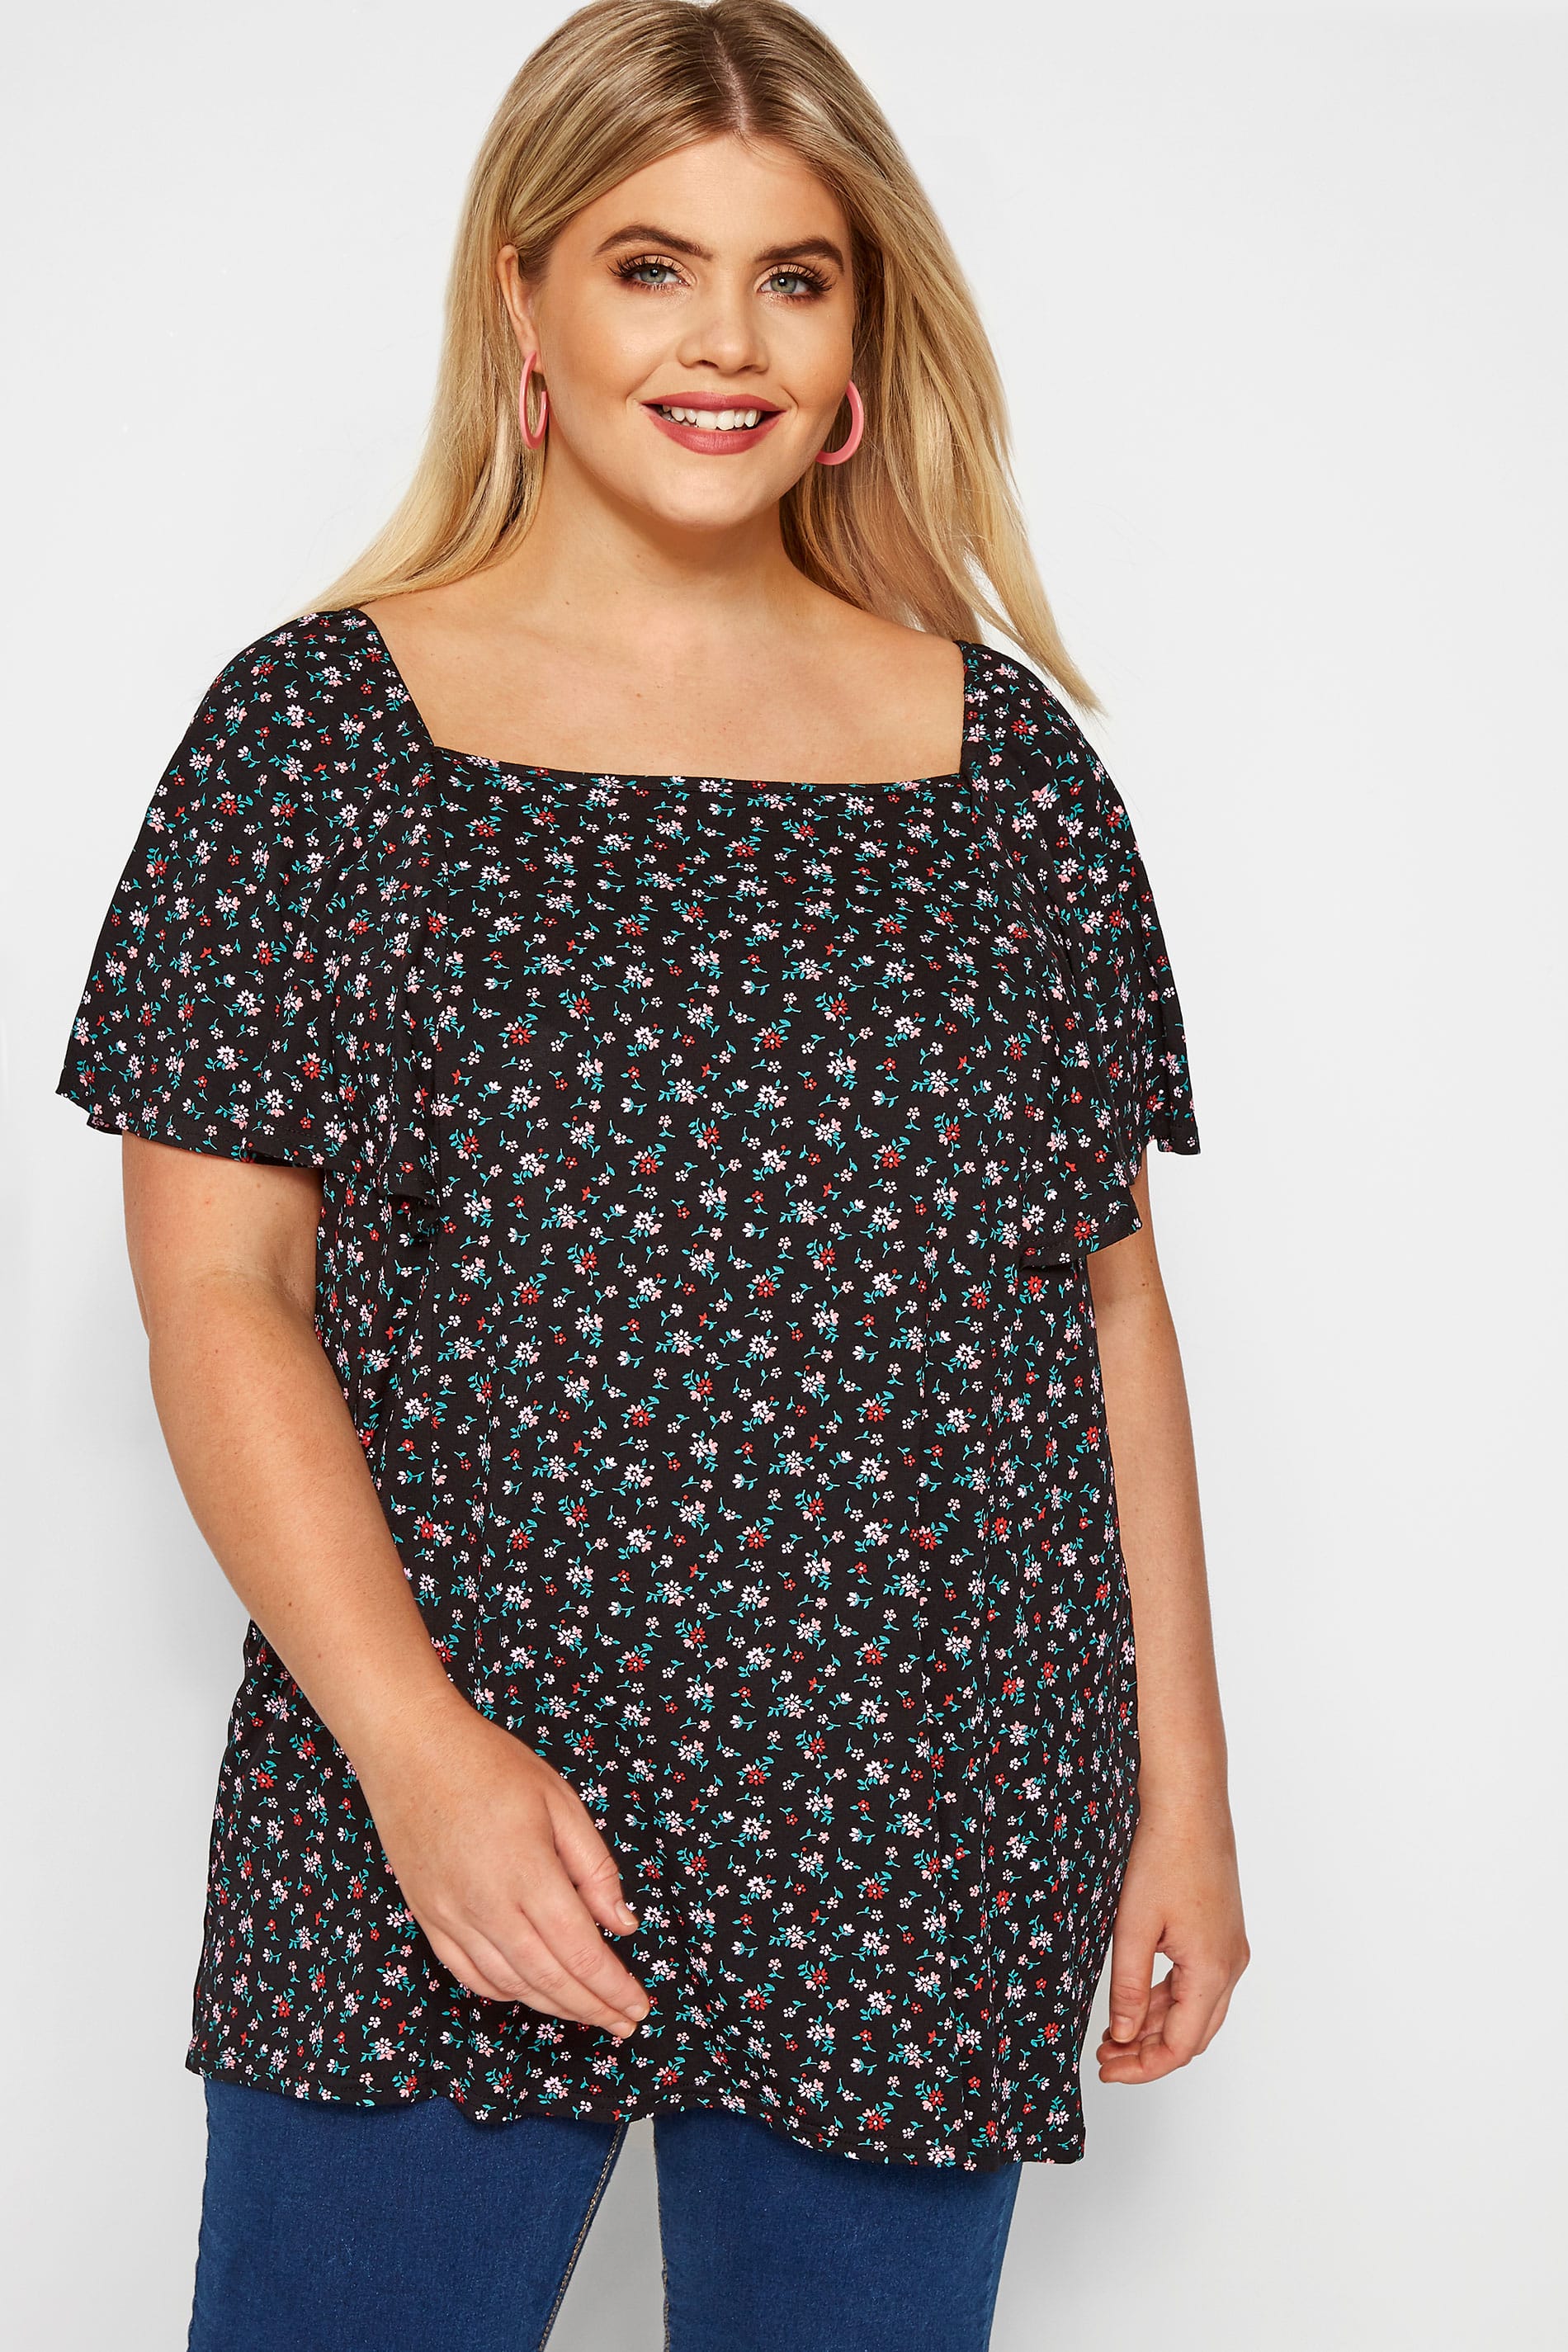 Black Ditsy Floral Square Neck Top | Sizes 16-36 | Yours Clothing